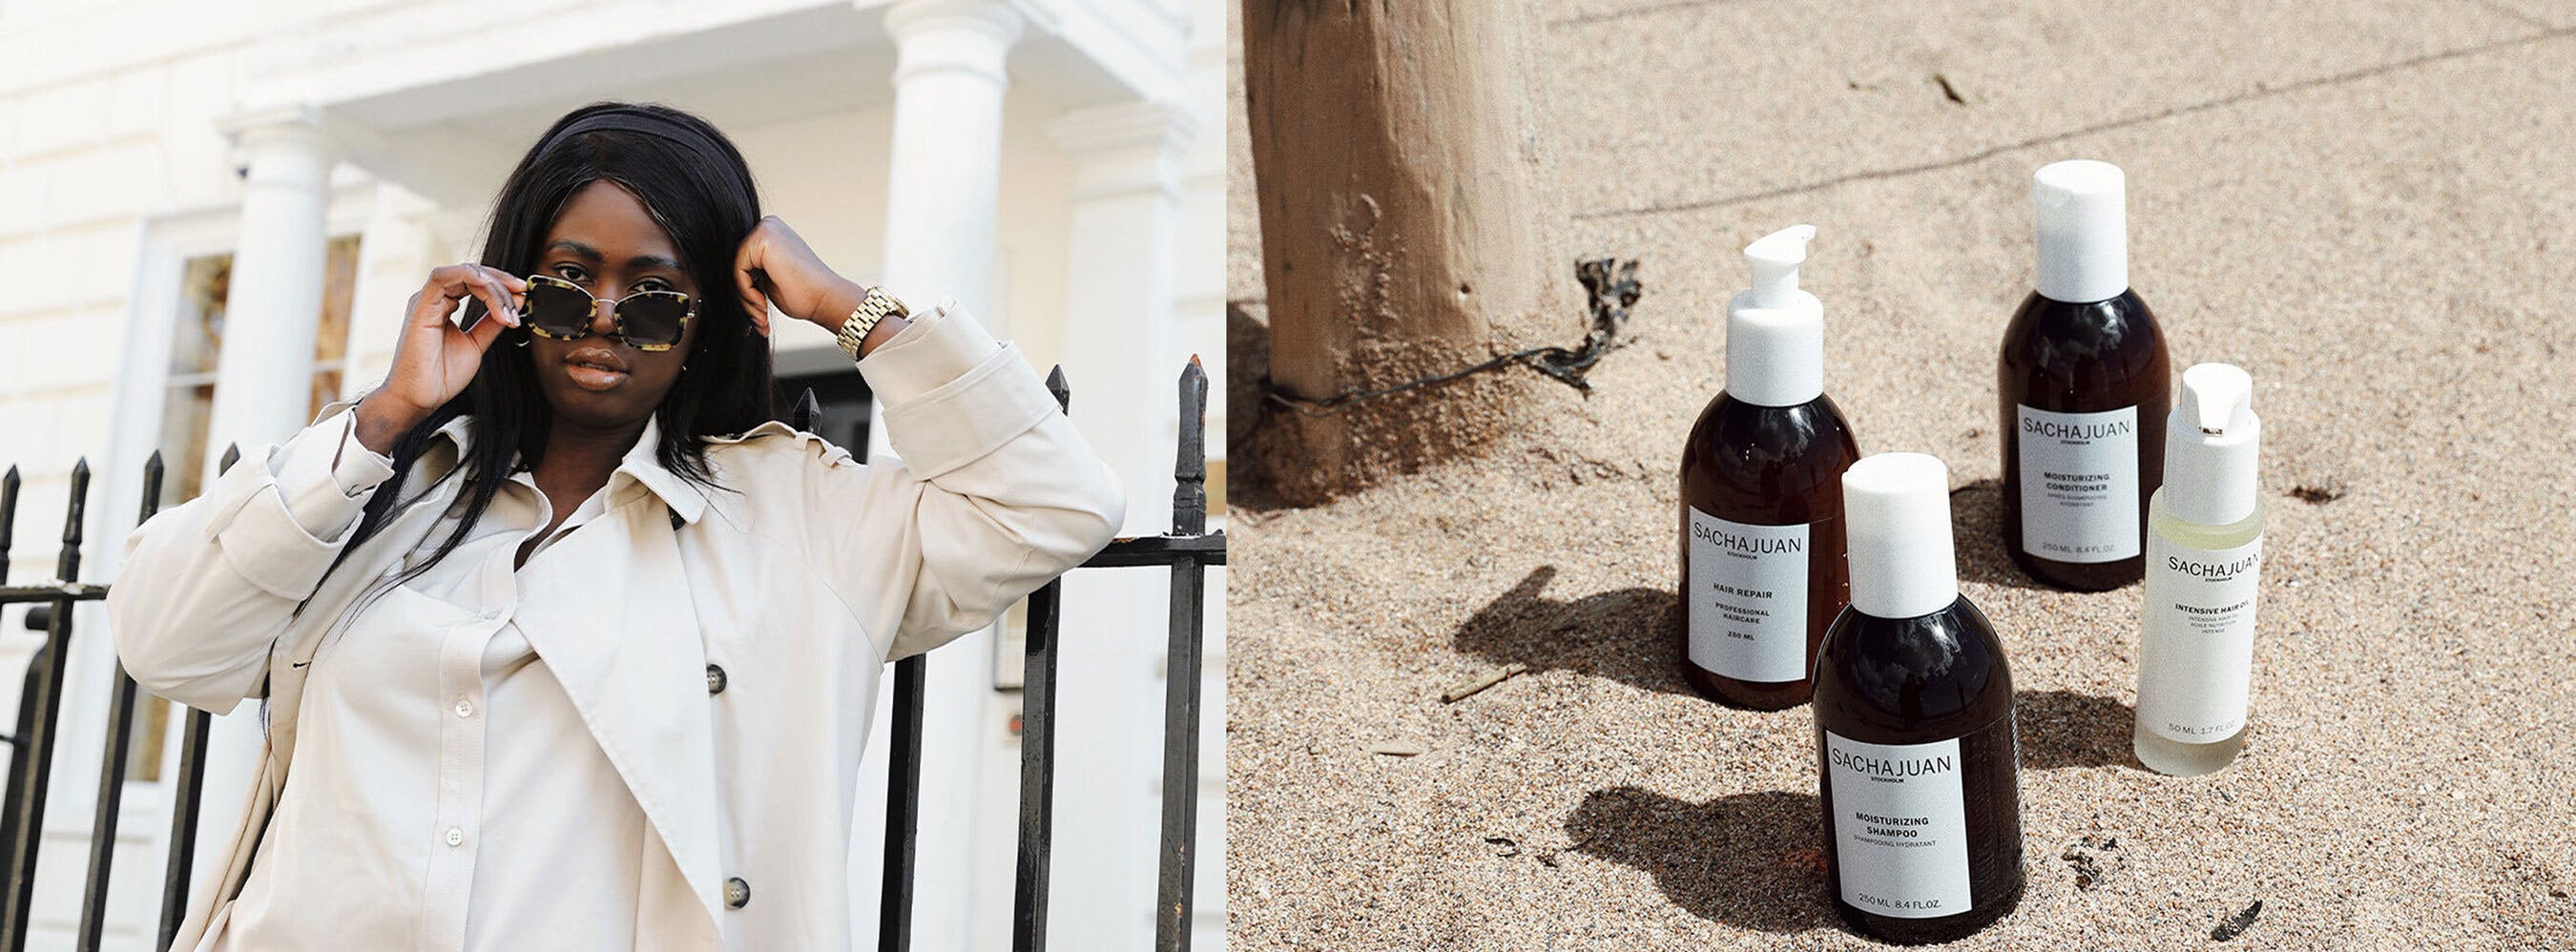 Image is a composition of images, on the left a woman of colour wears a cream coat and looks over her tortoiseshell sunglasses straight down the camera, on the right is a composition of beauty products, with brown bottles and white lids nestled in sand